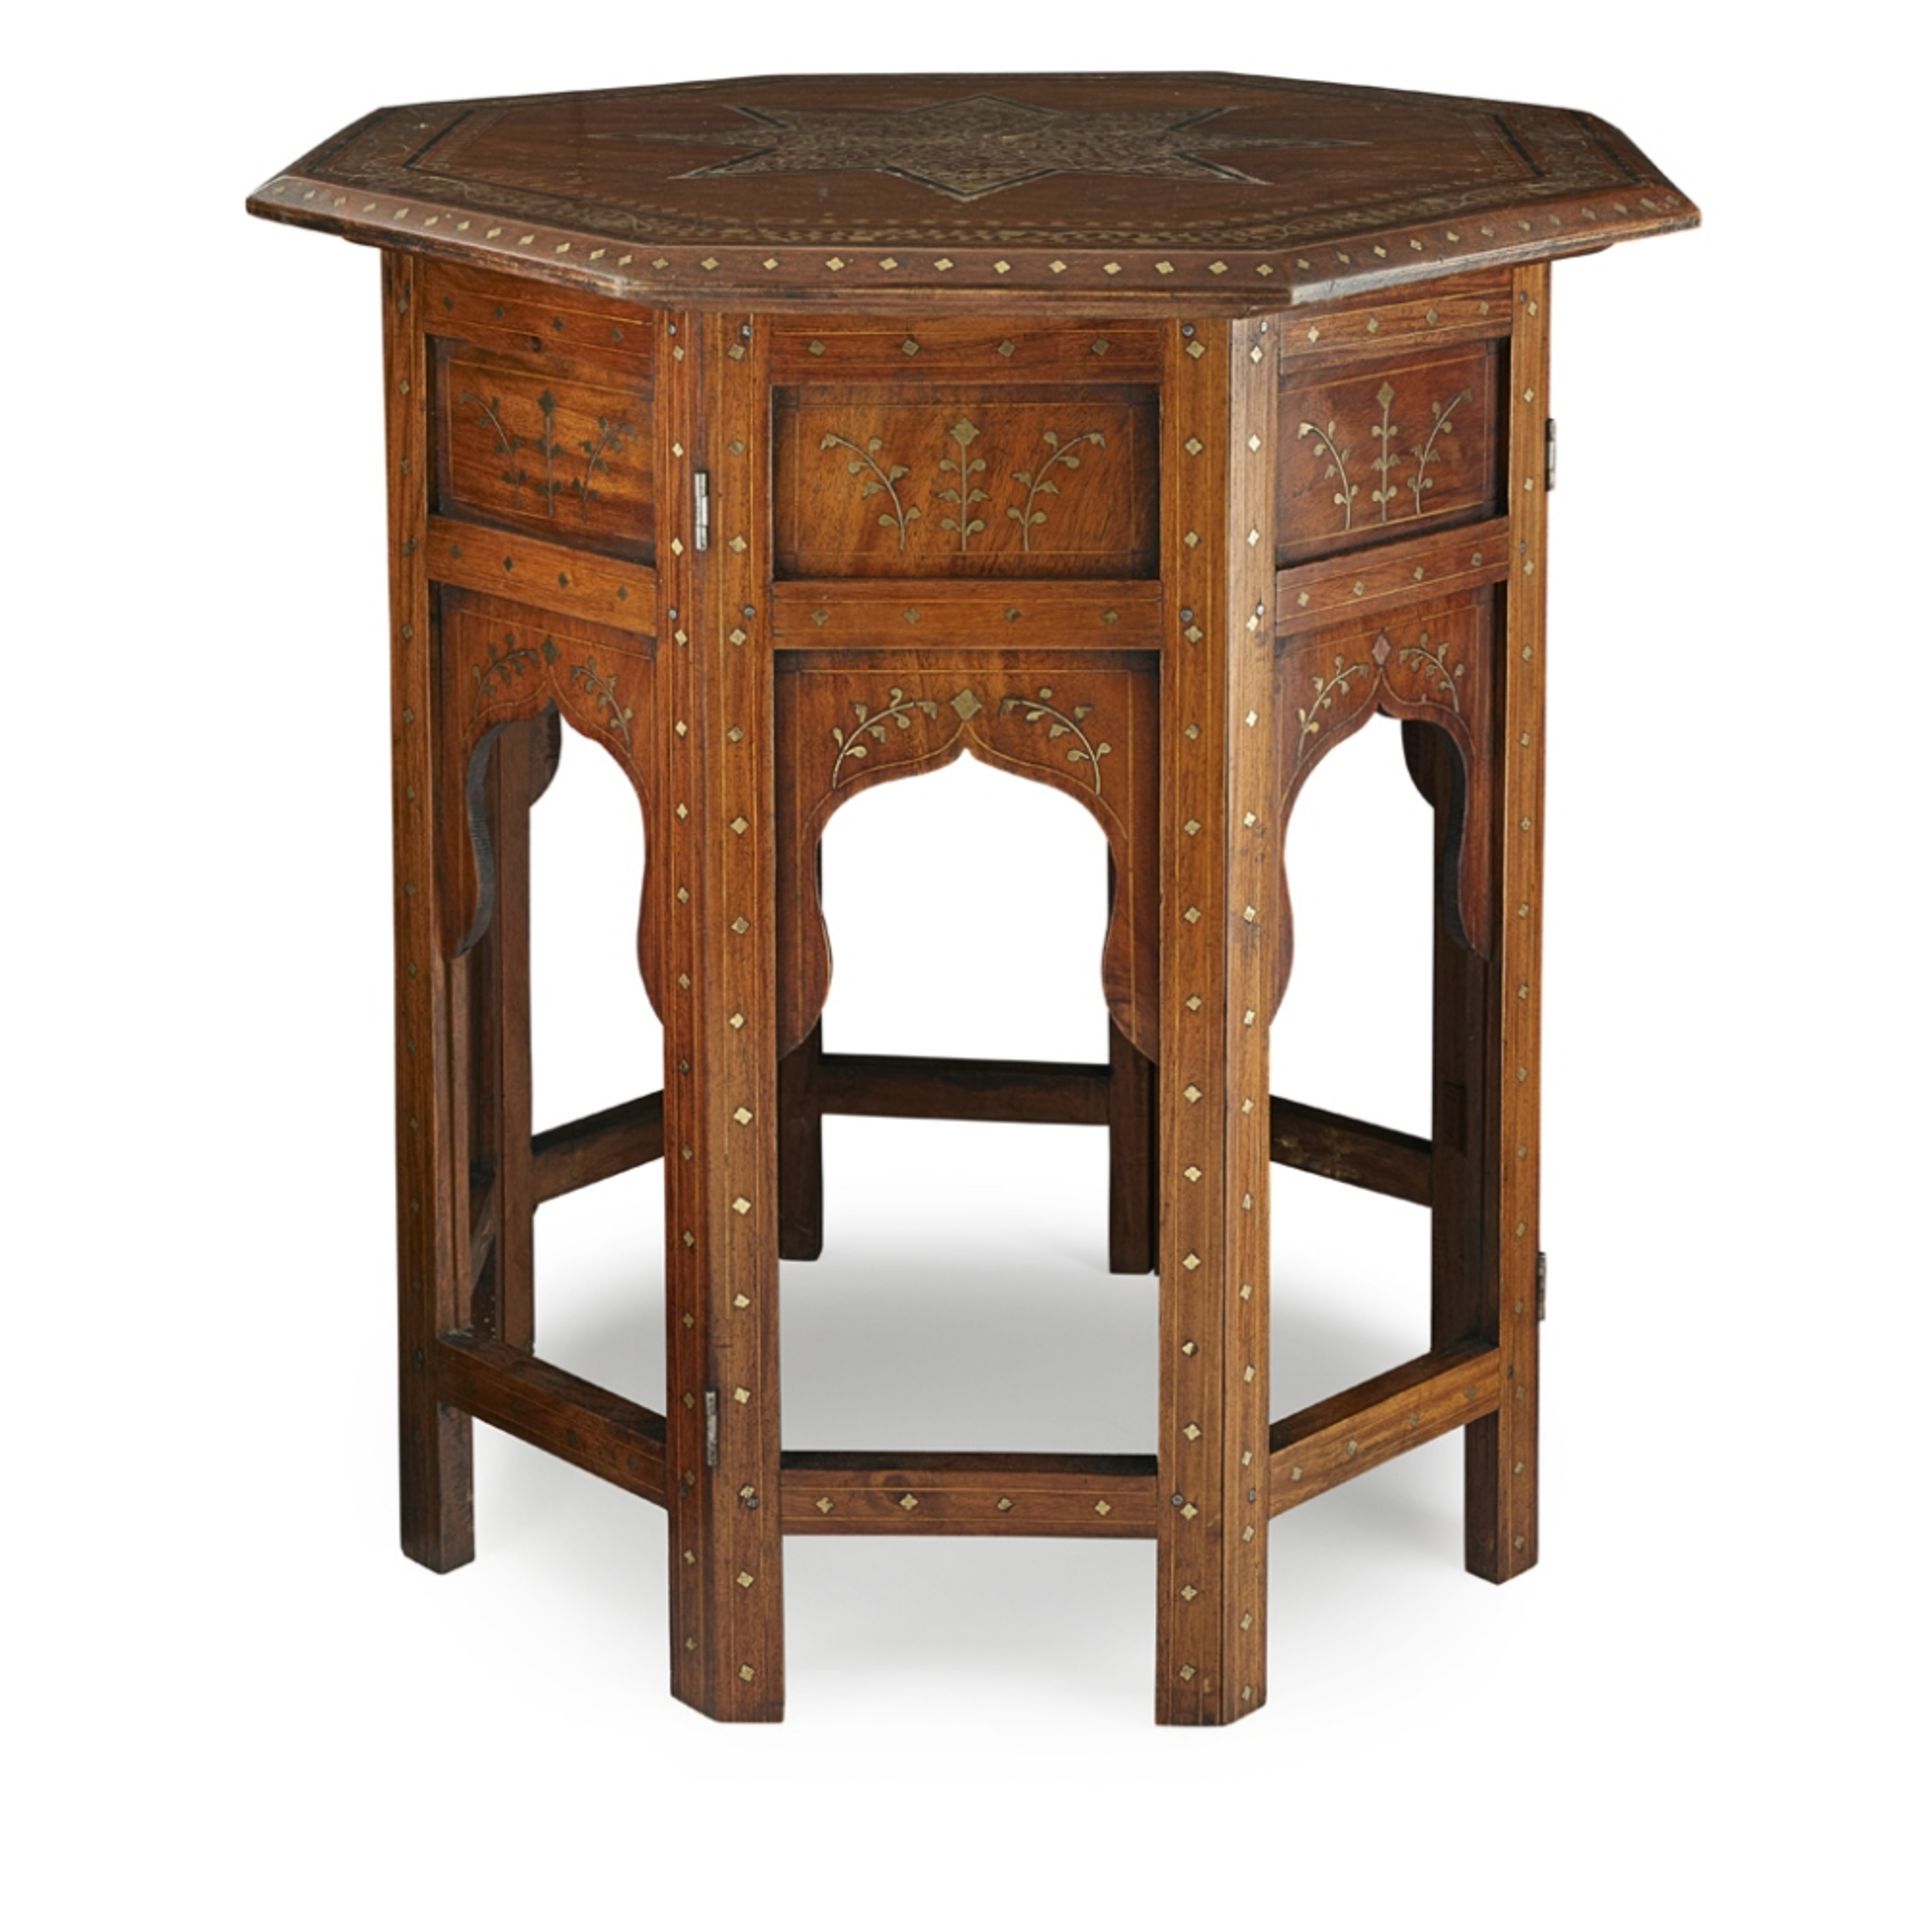 ANGLO-INDIAN BRASS-INLAID OCTAGONAL OCCASIONAL TABLE19TH CENTURY the octagonal top raised on a